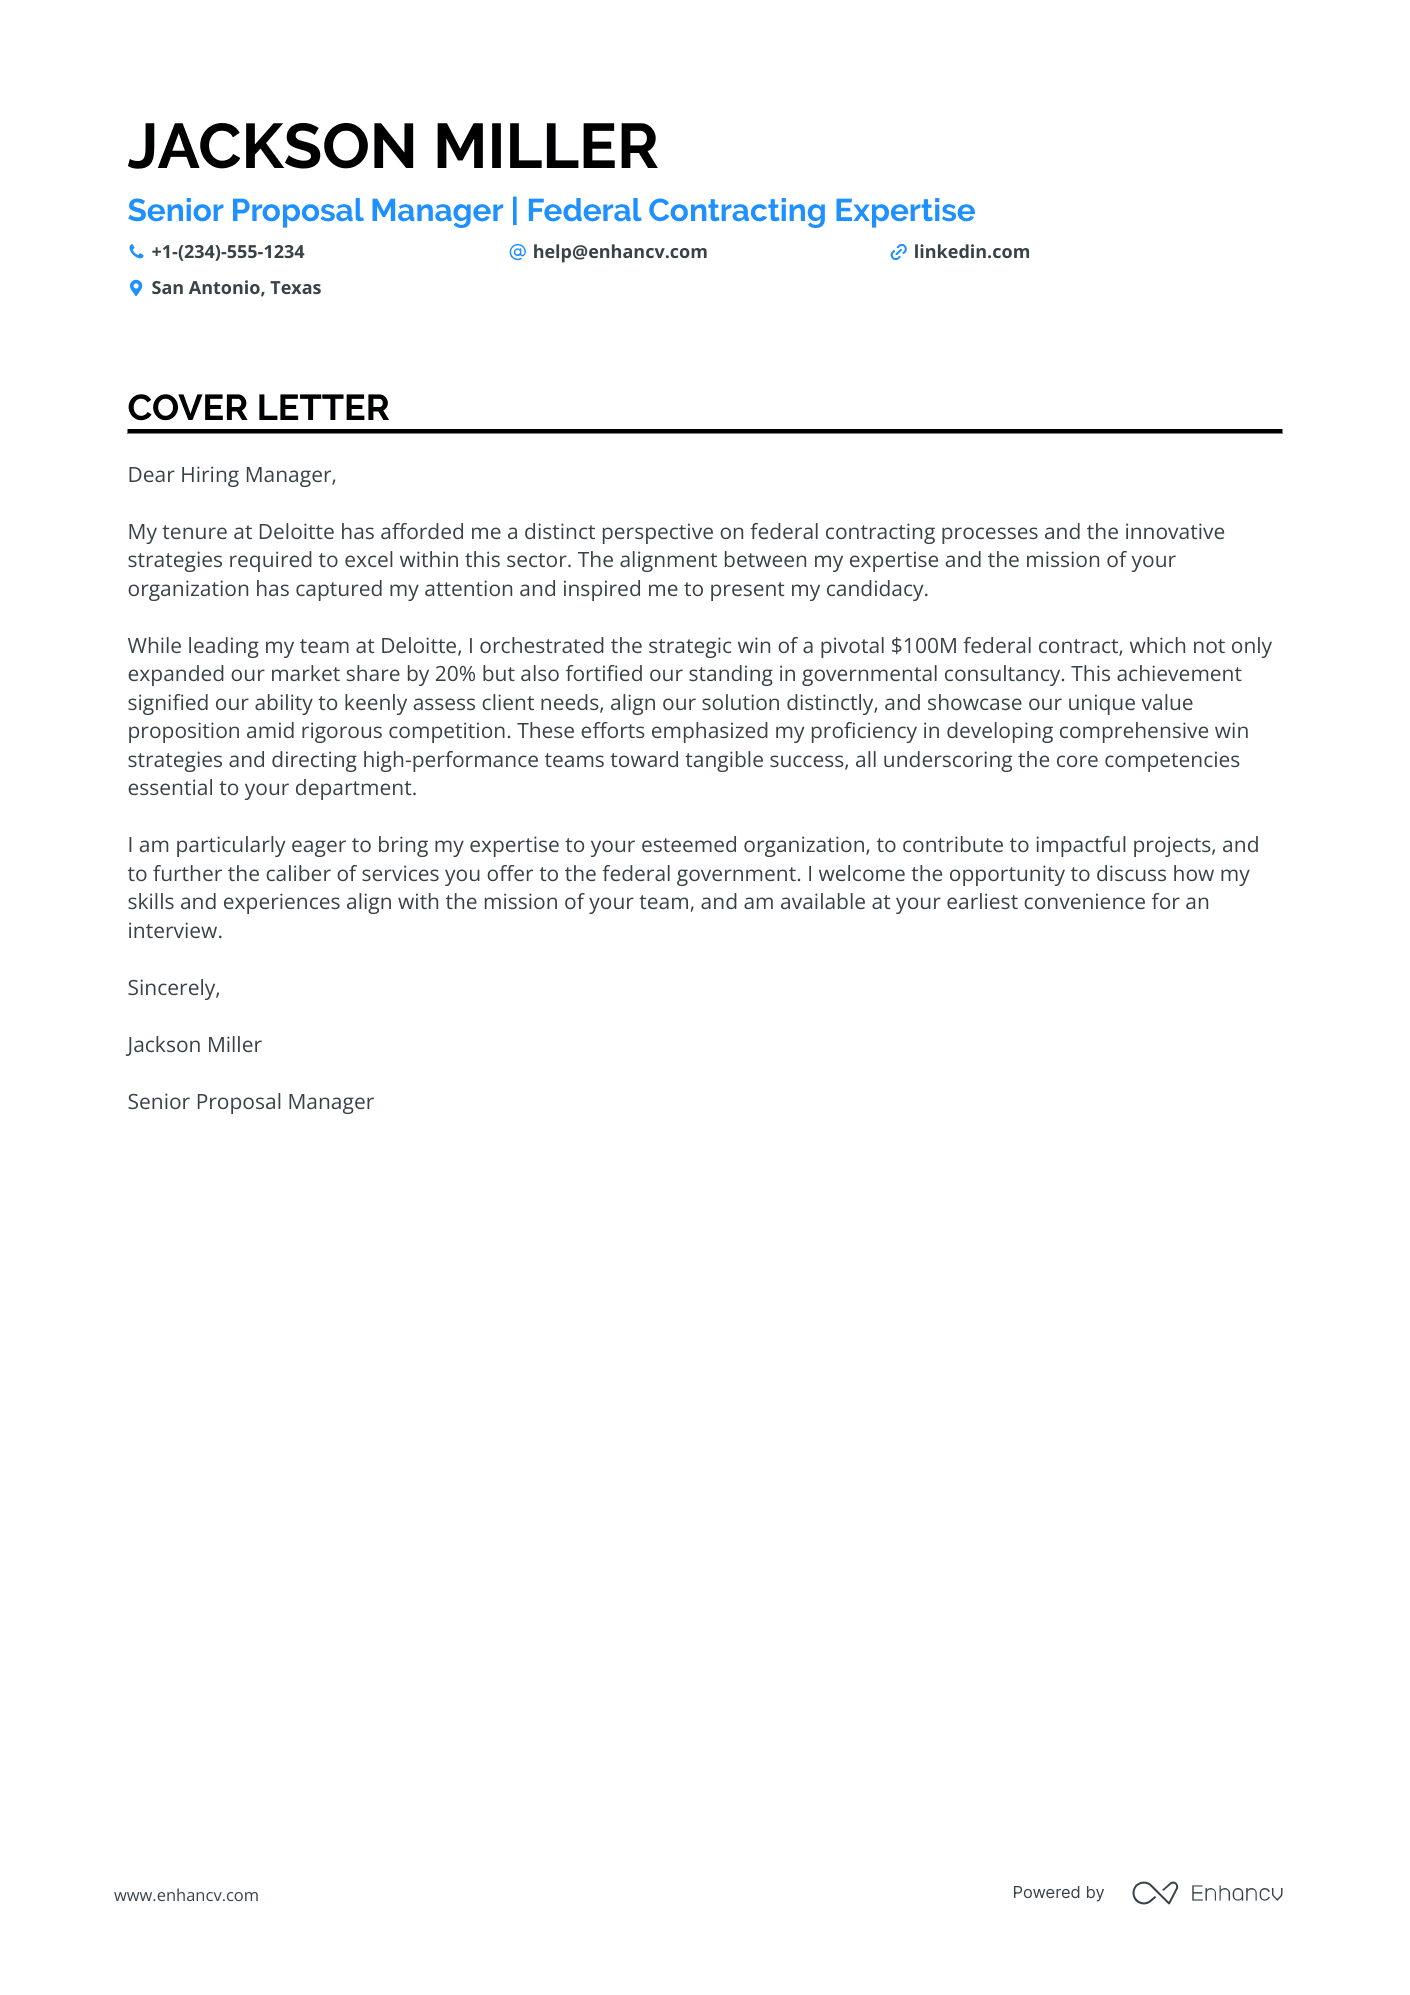 Proposal Manager cover letter